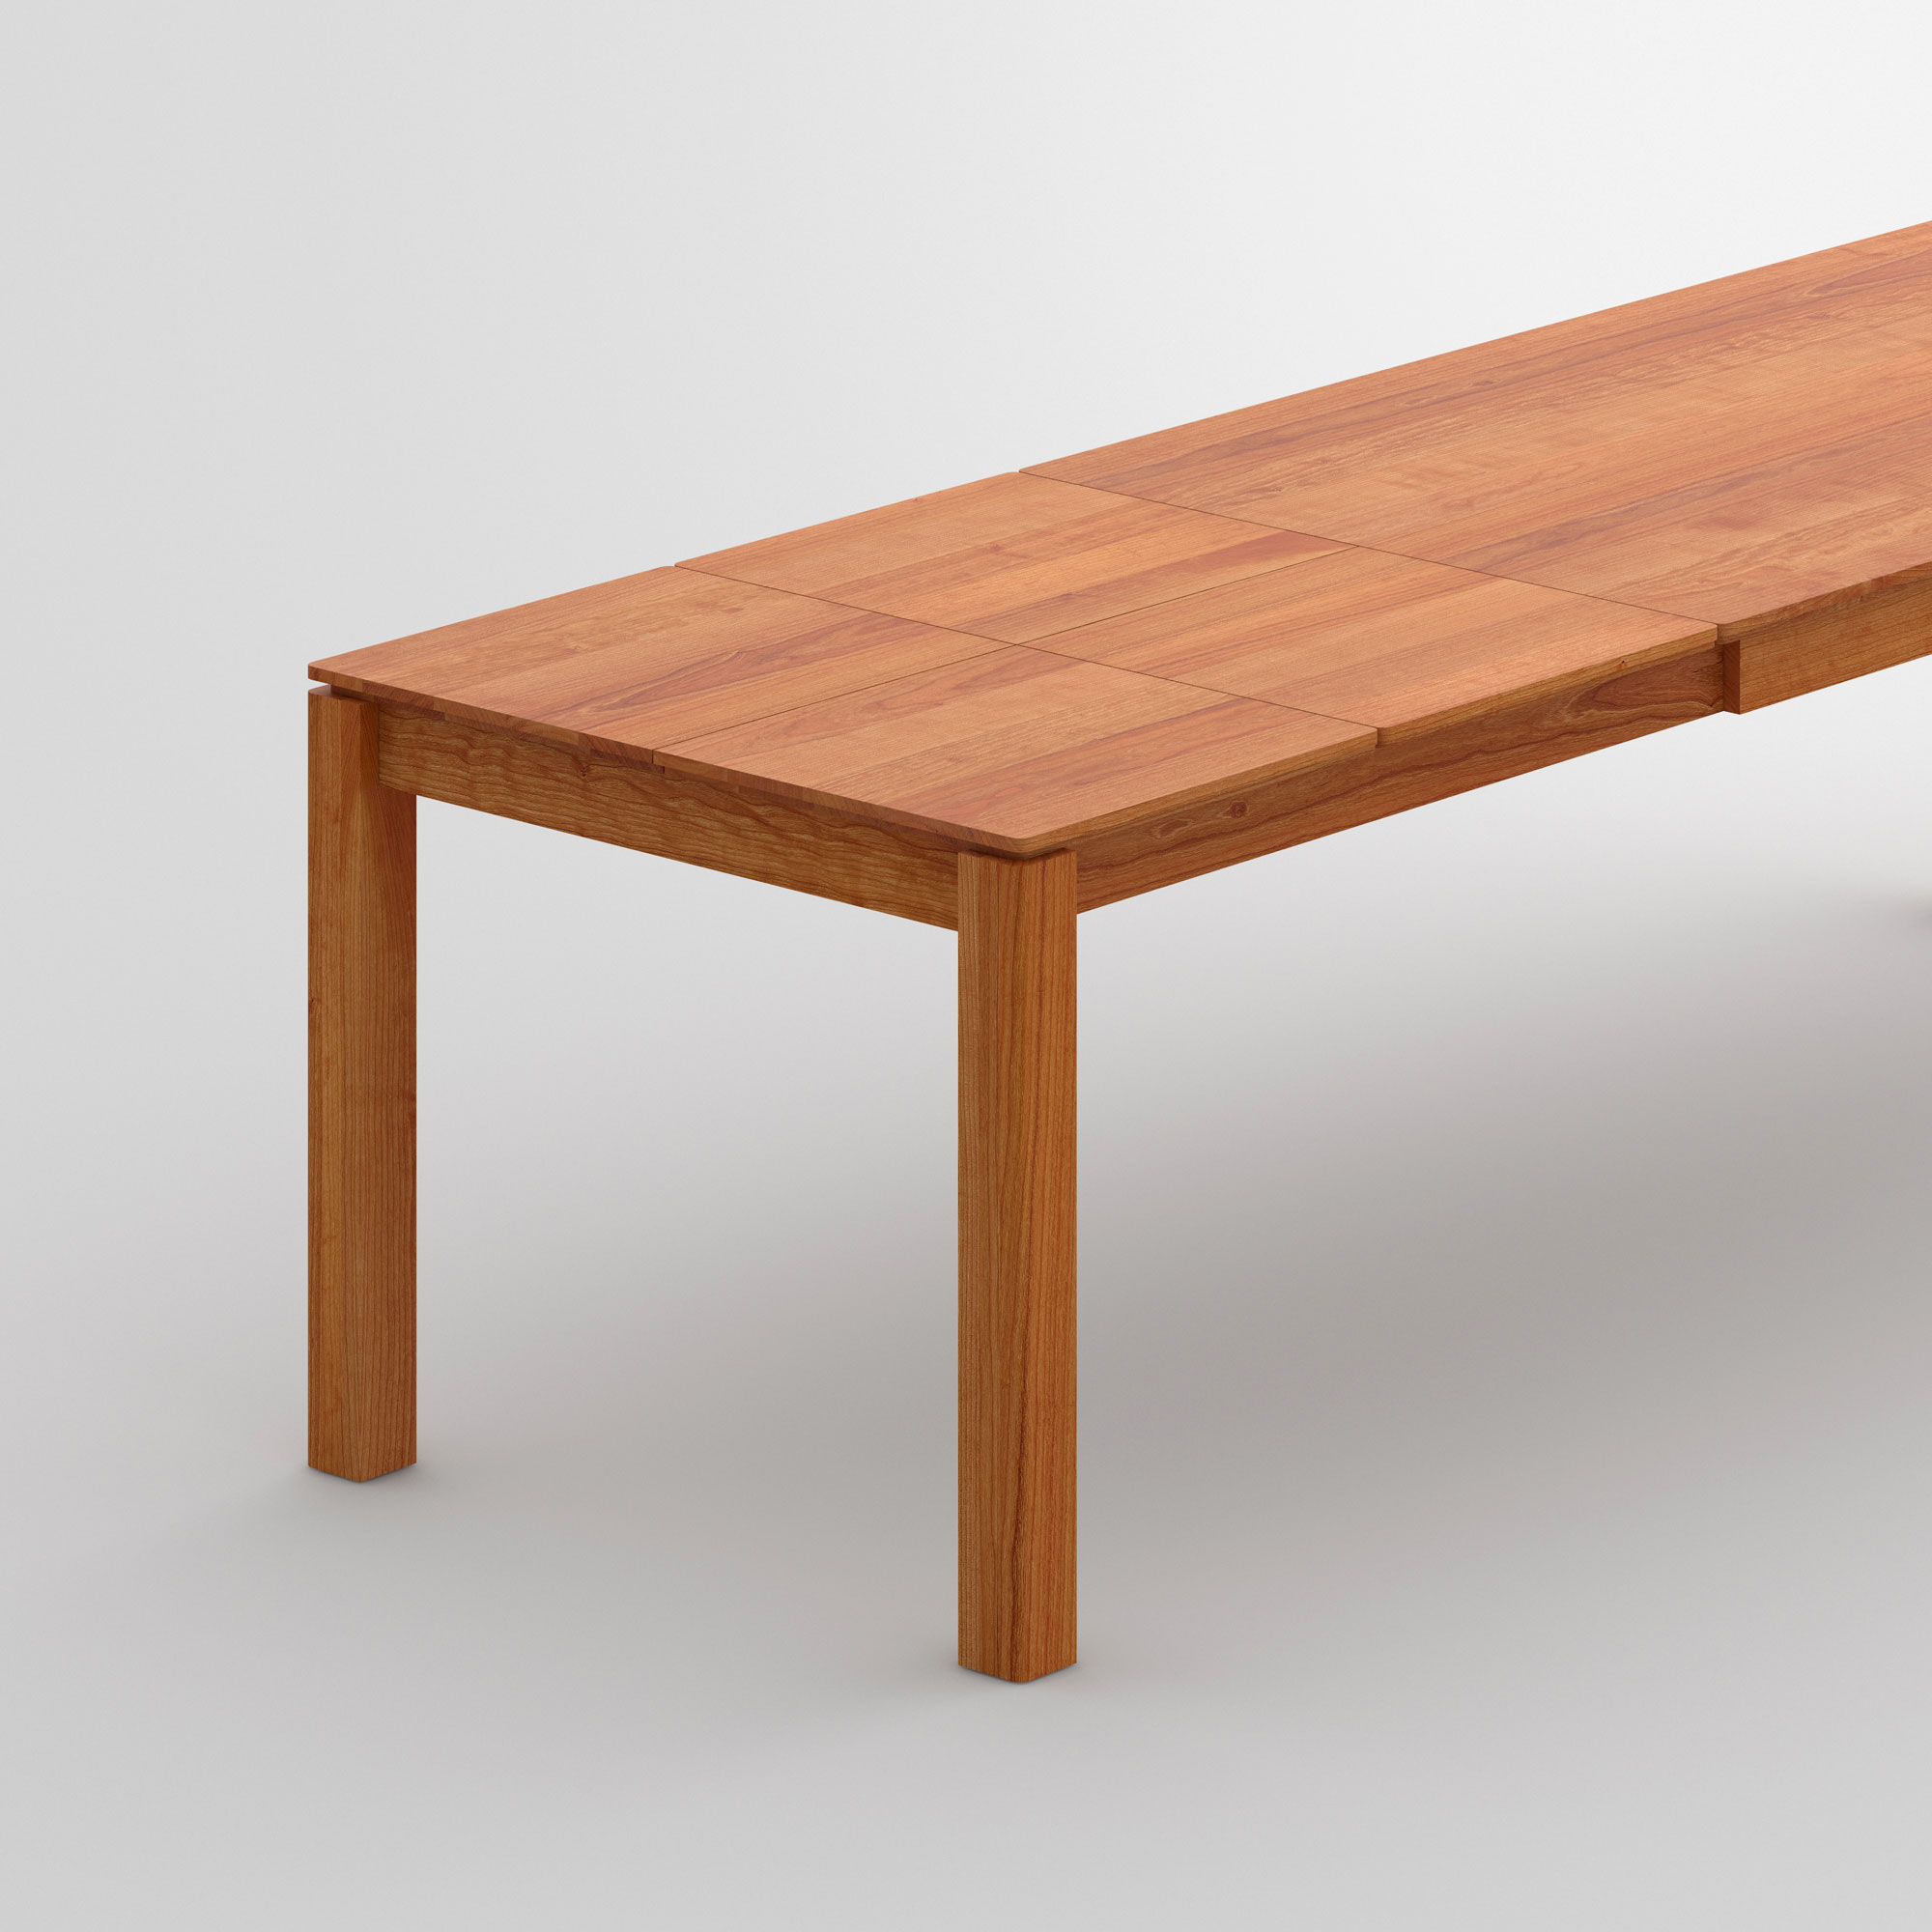 Dining Table Butterfly-System VERSO BUTTERFLY cam1 custom made in solid wood by vitamin design